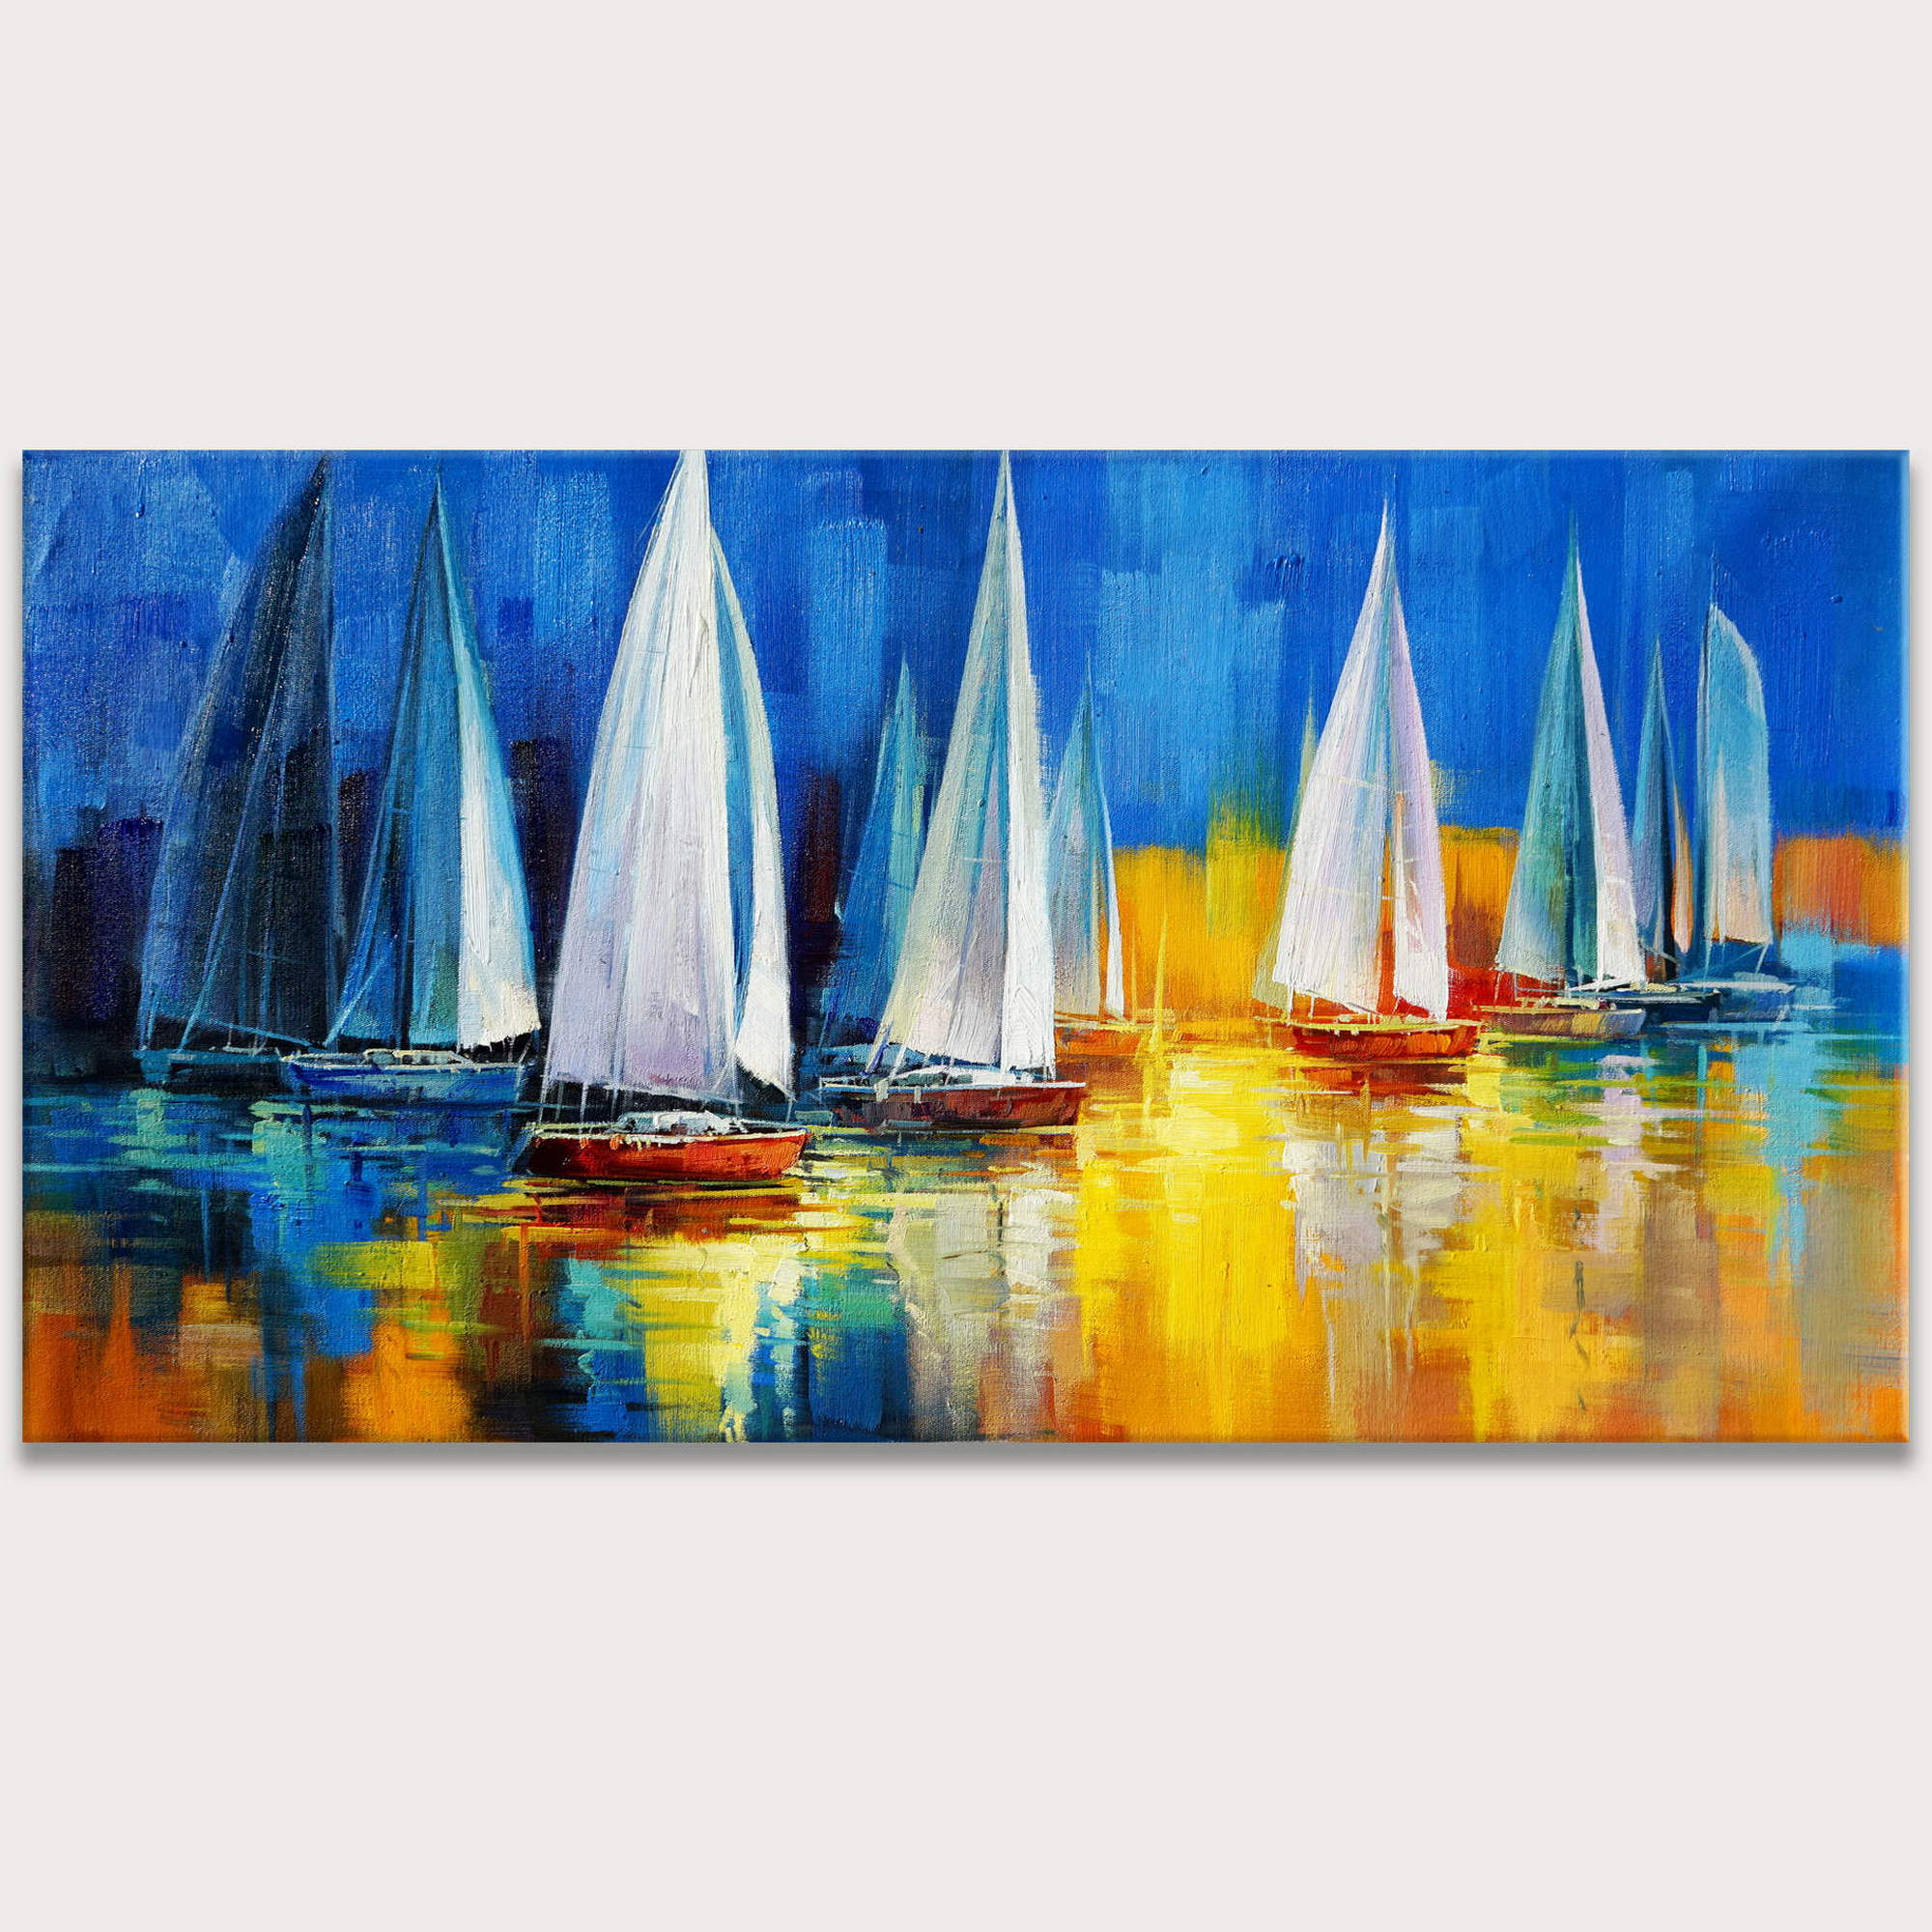 Abstract painting Regatta Sails at Sunset 60x120cm